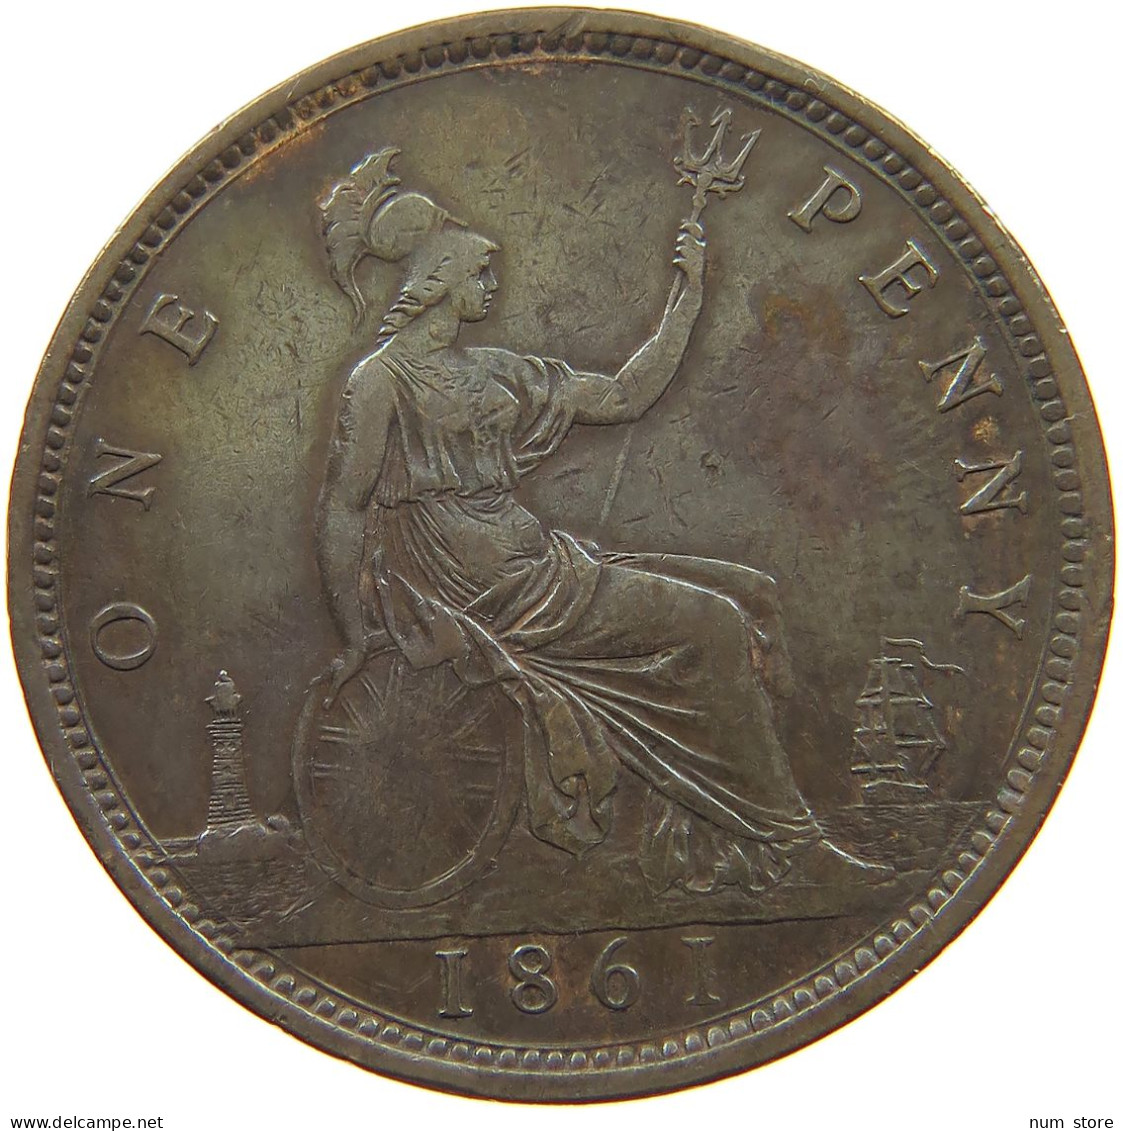 GREAT BRITAIN PENNY 1861 Victoria 1837-1901 #t003 0165 - D. 1 Penny